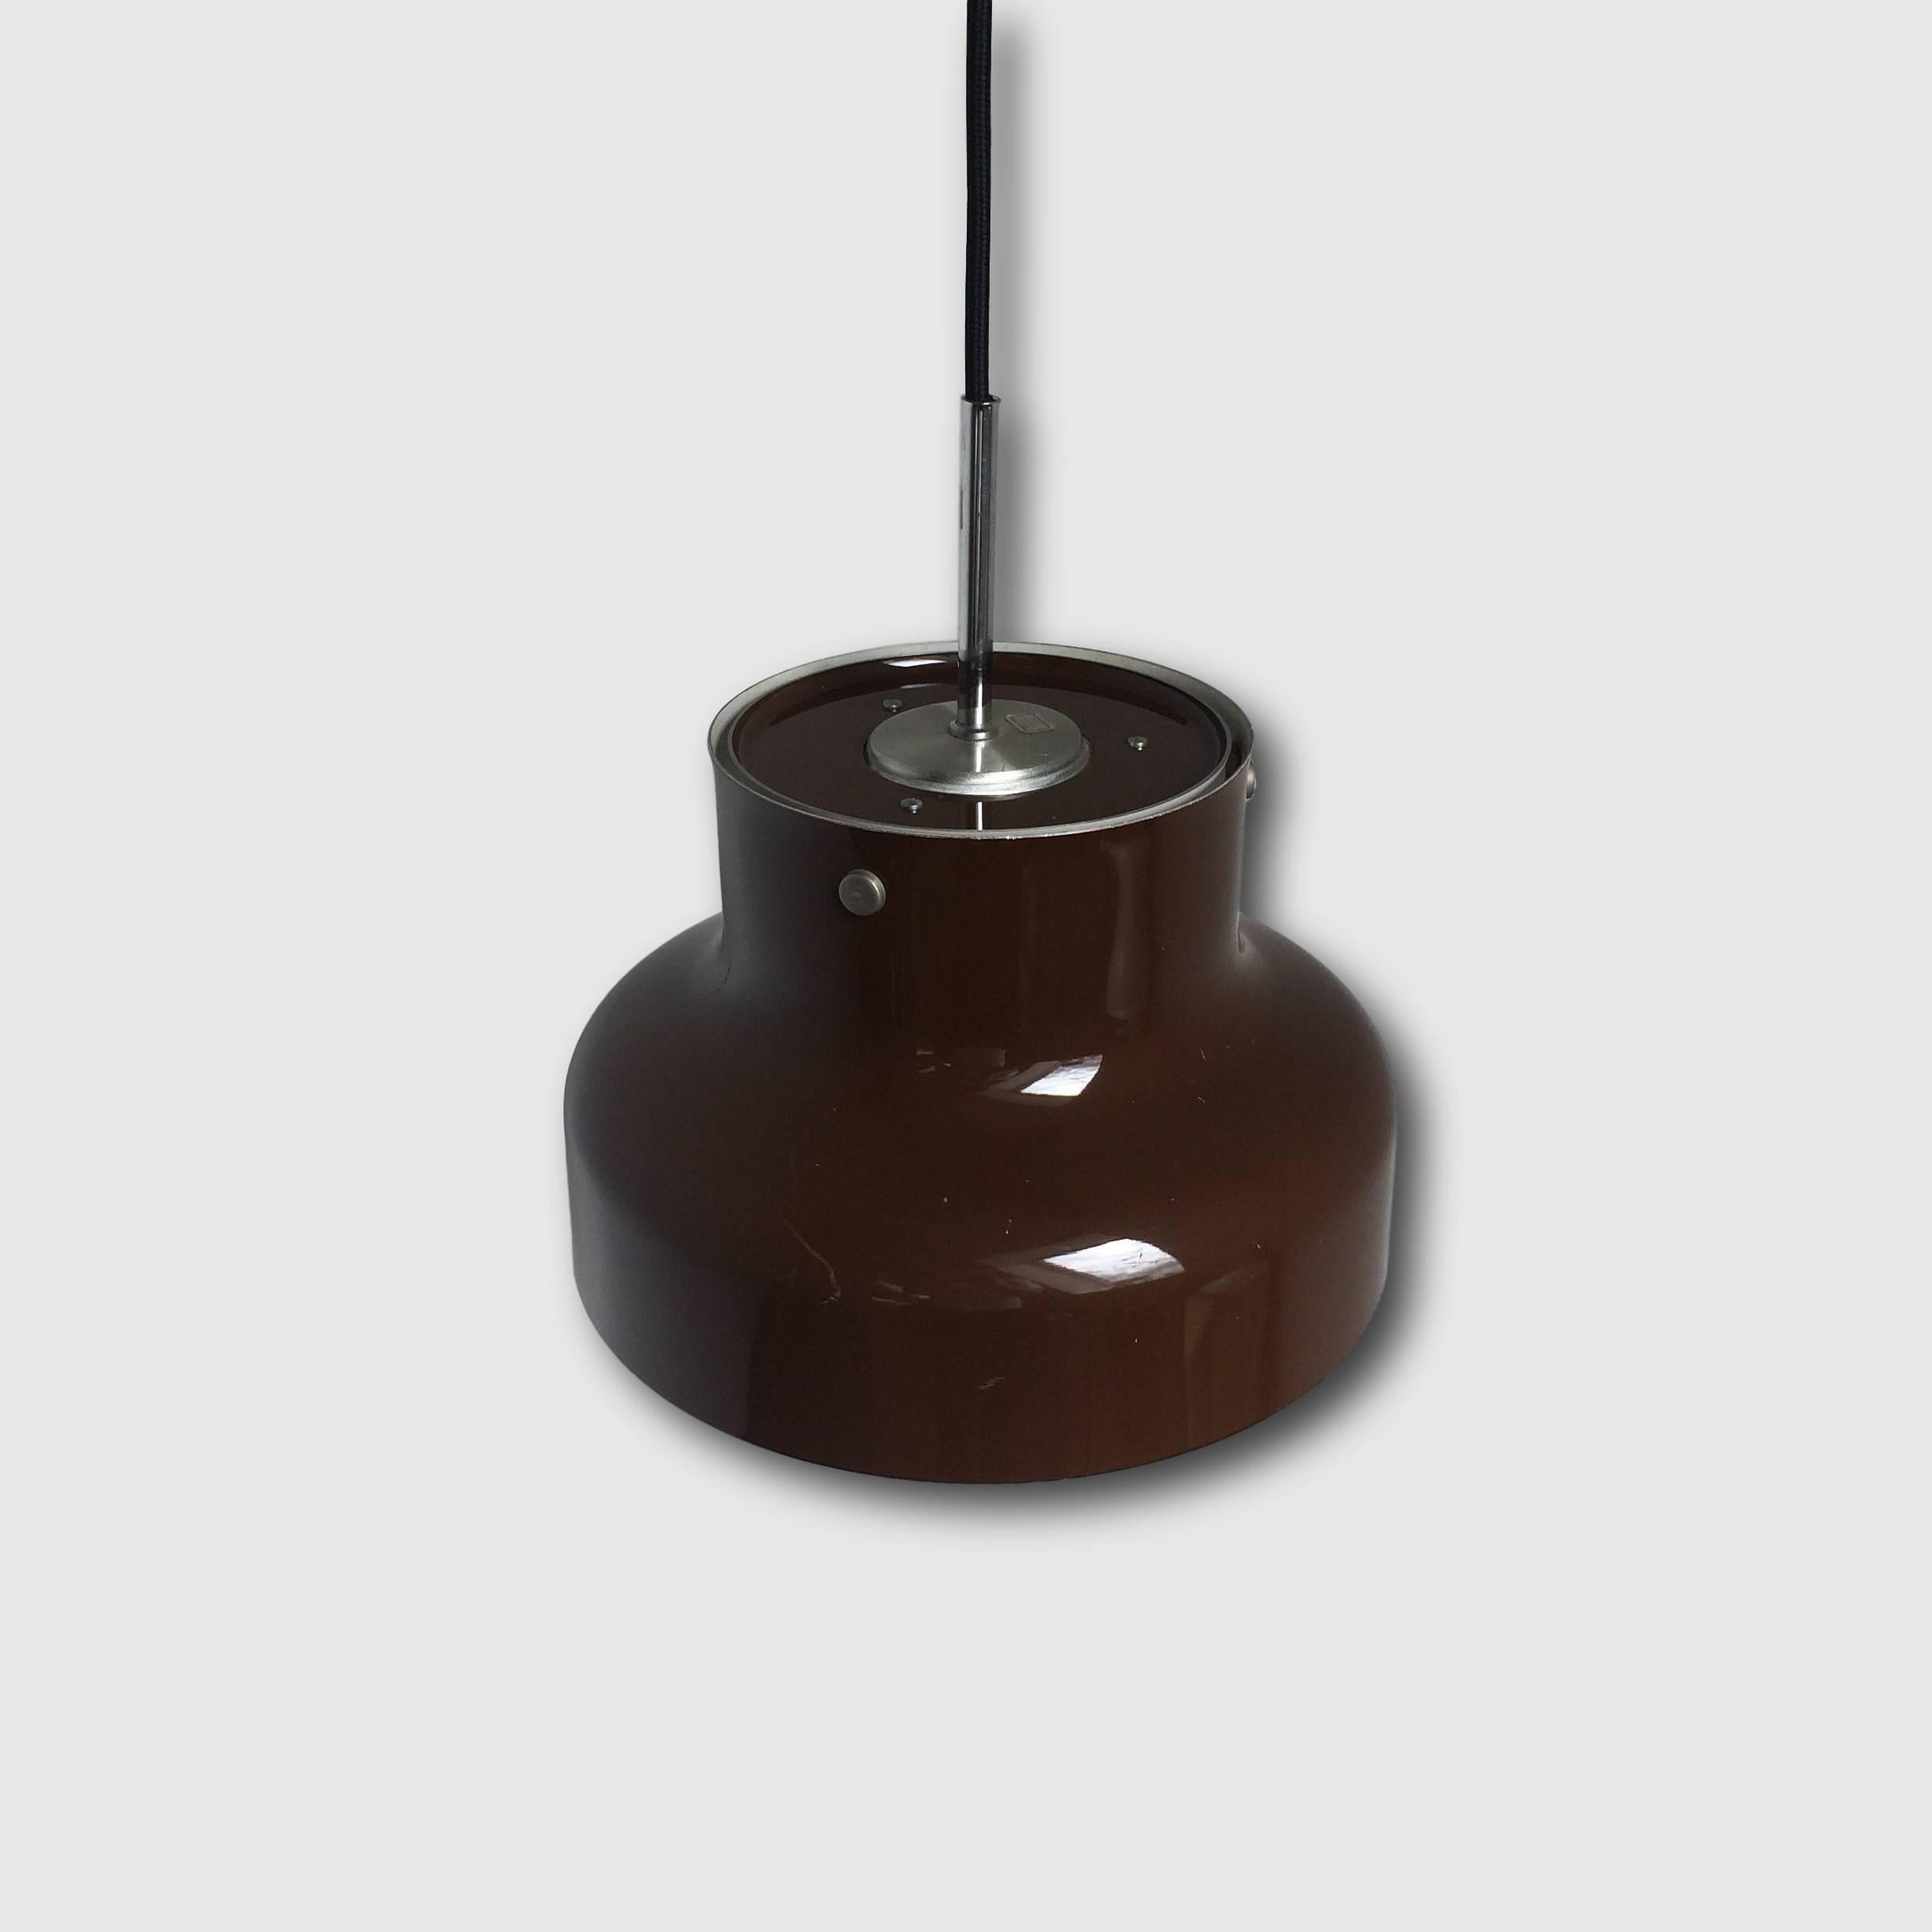 The popular Bumling from Swedish Ateljé Lyktan

The brown lamp, is a classic design from Anders Pehrson.

The lamp has some scratches and comes without the diffuser, but otherwise it looks great.




 